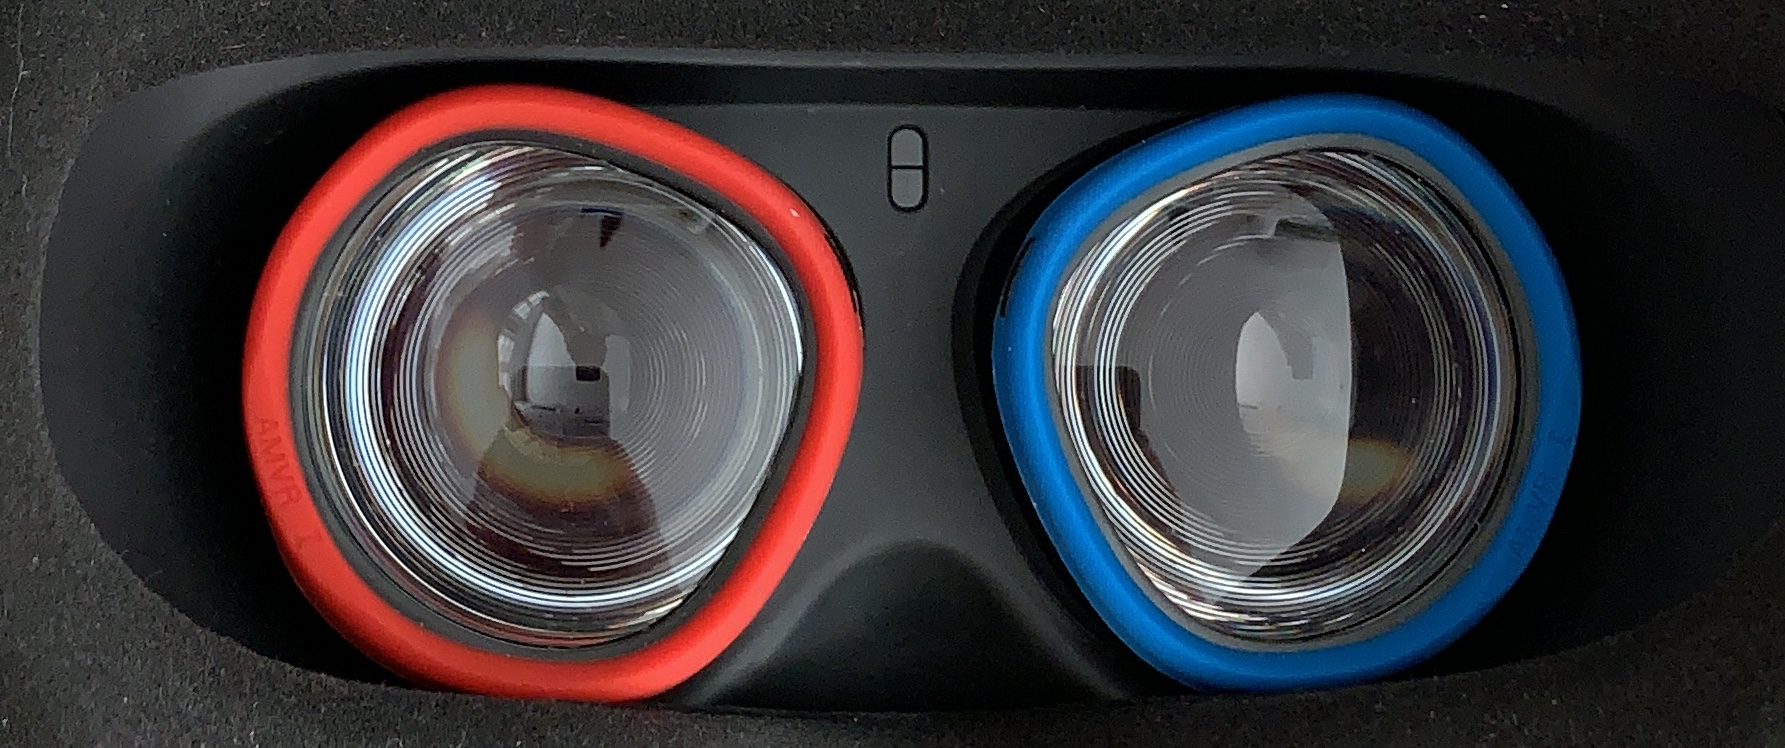 Close-up of VR headset eyepieces